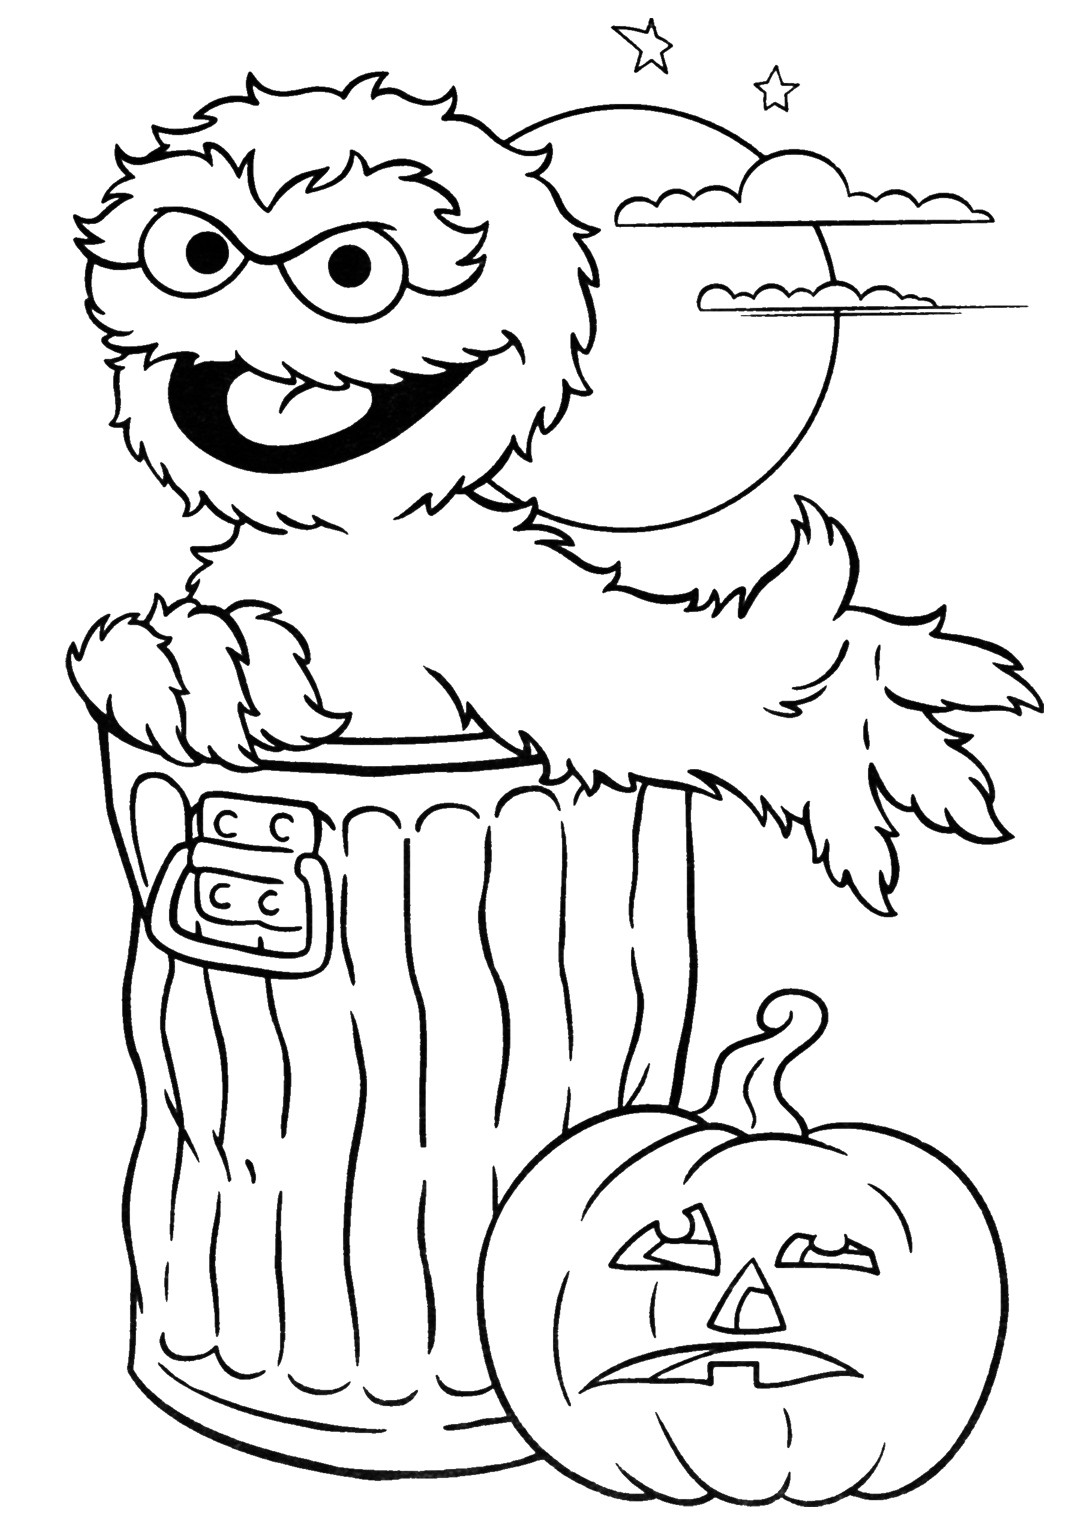 Free Halloween Coloring Pages For Kids
 HALLOWEEN COLORINGS